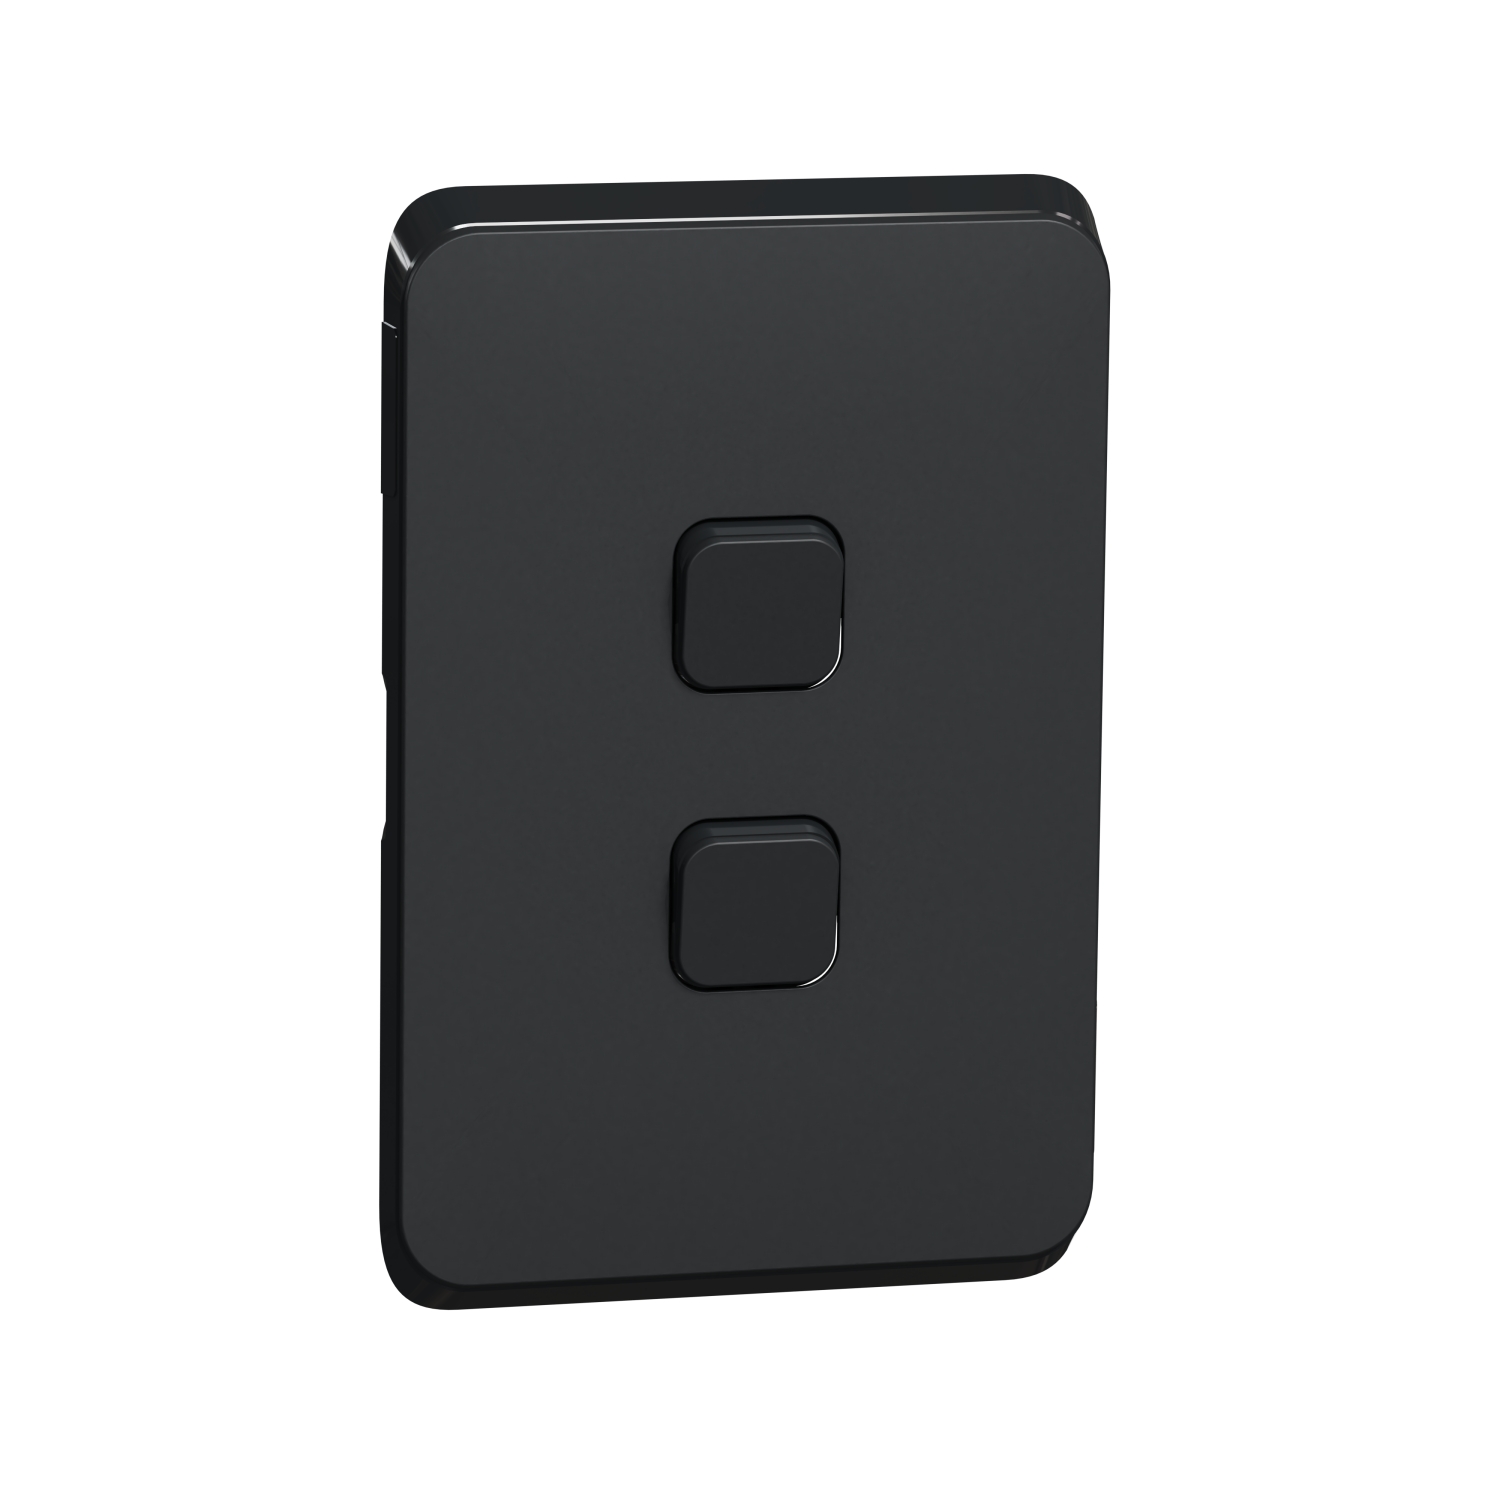 PDL Iconic - Cover Plate Switch 2-Gang - Solid Black